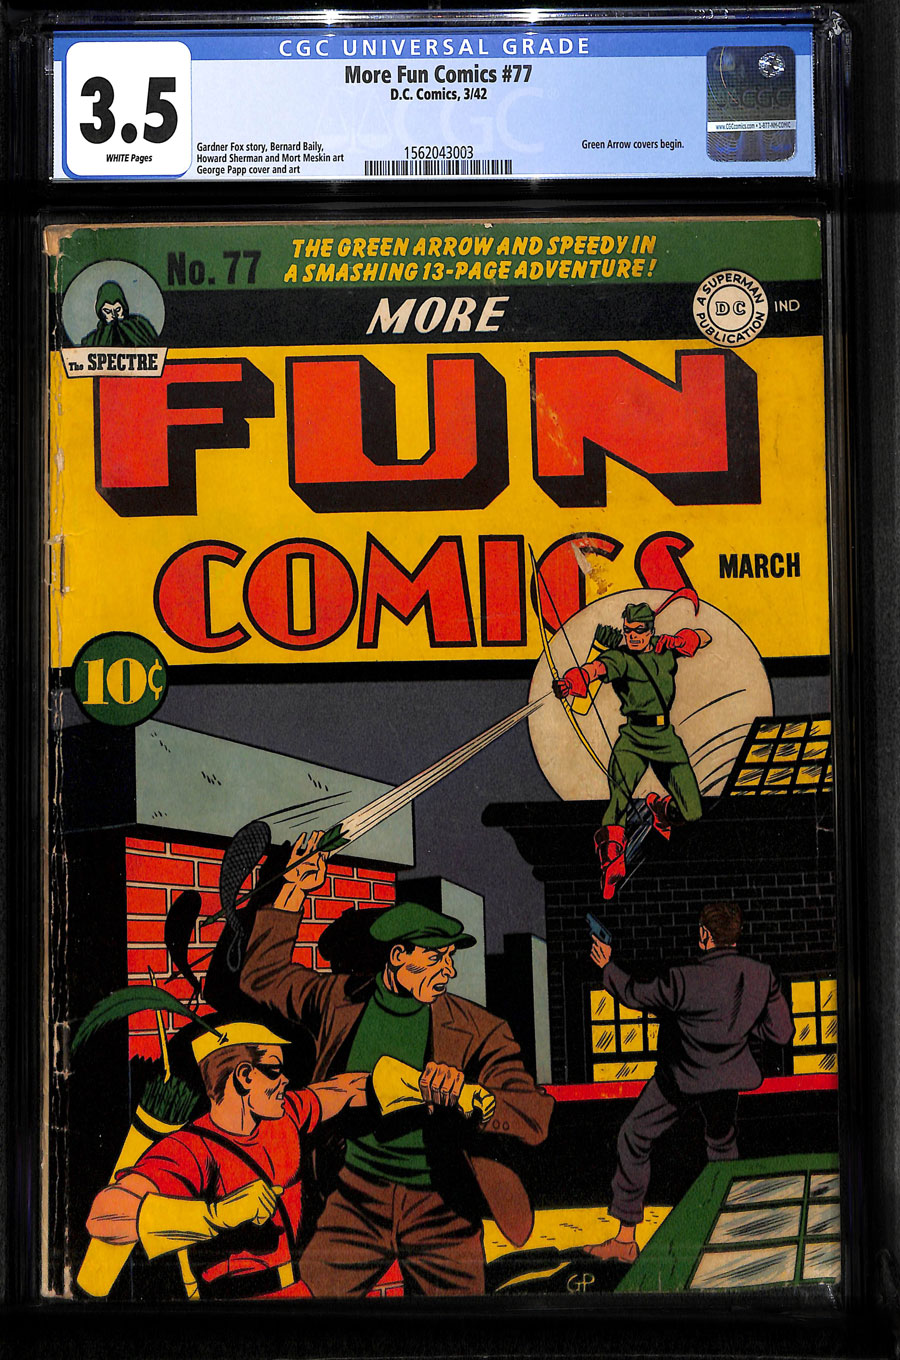 Classic Covers Chronologically - Page 3 Mor1.1063a